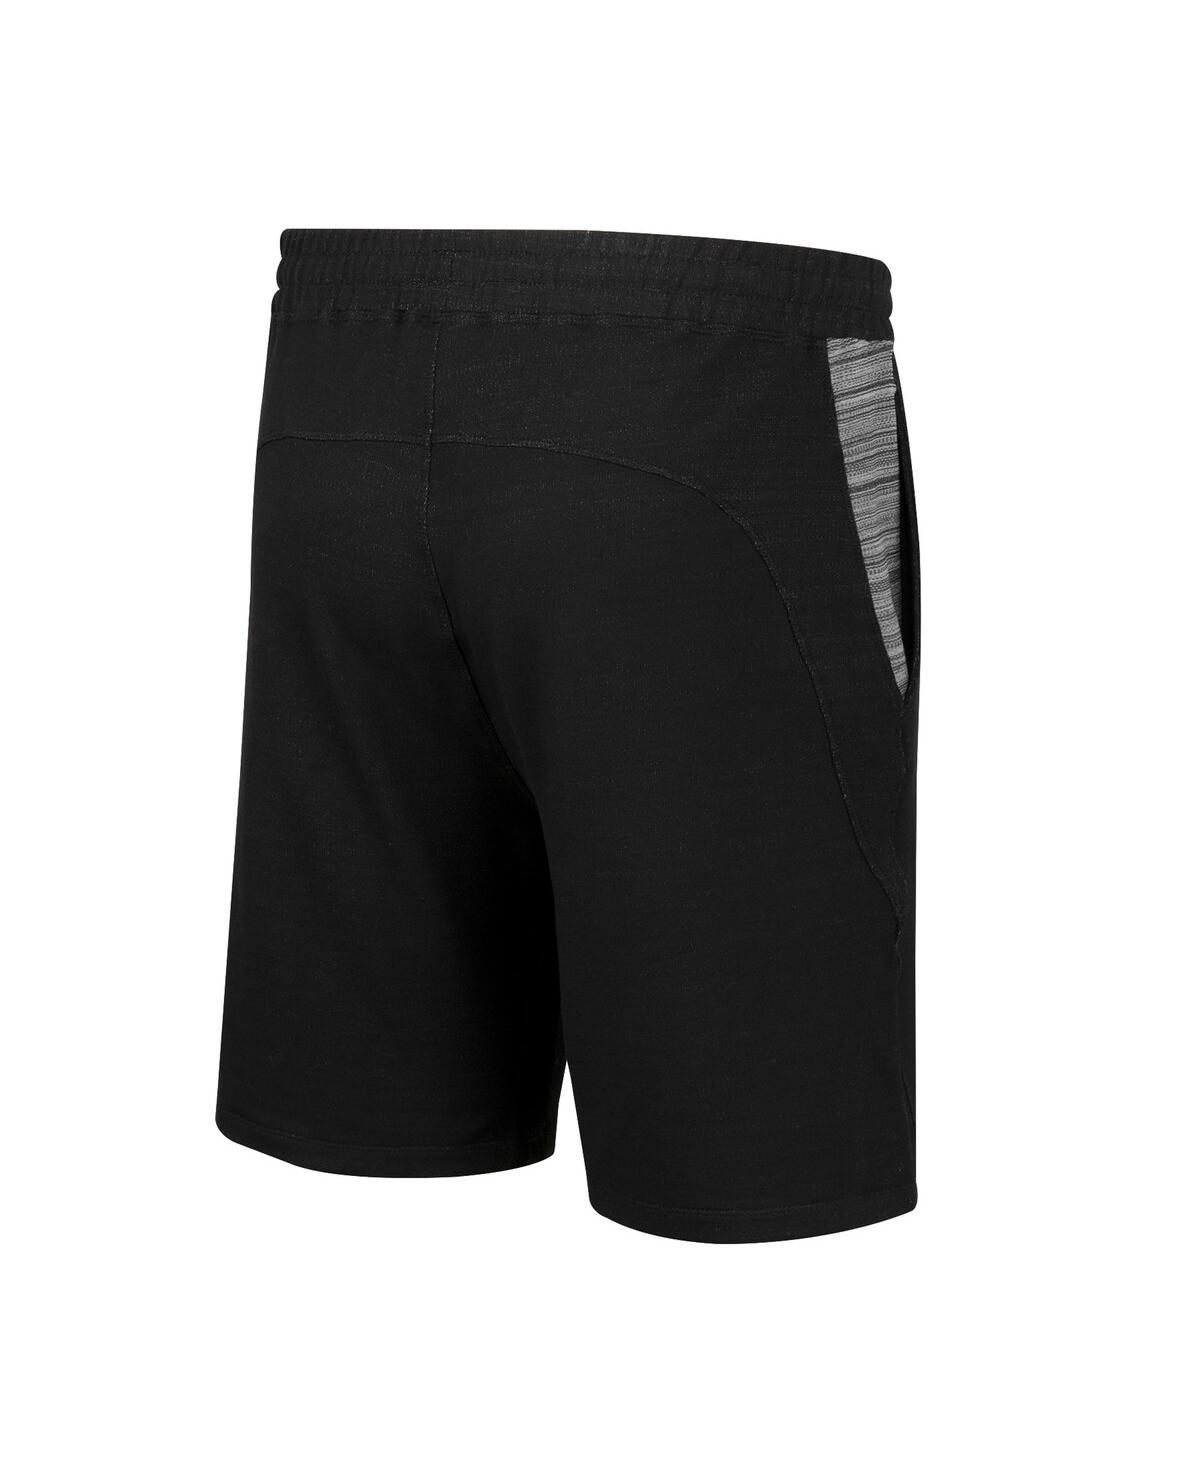 Shop Colosseum Men's  Black Army Black Knights Wild Party Shorts